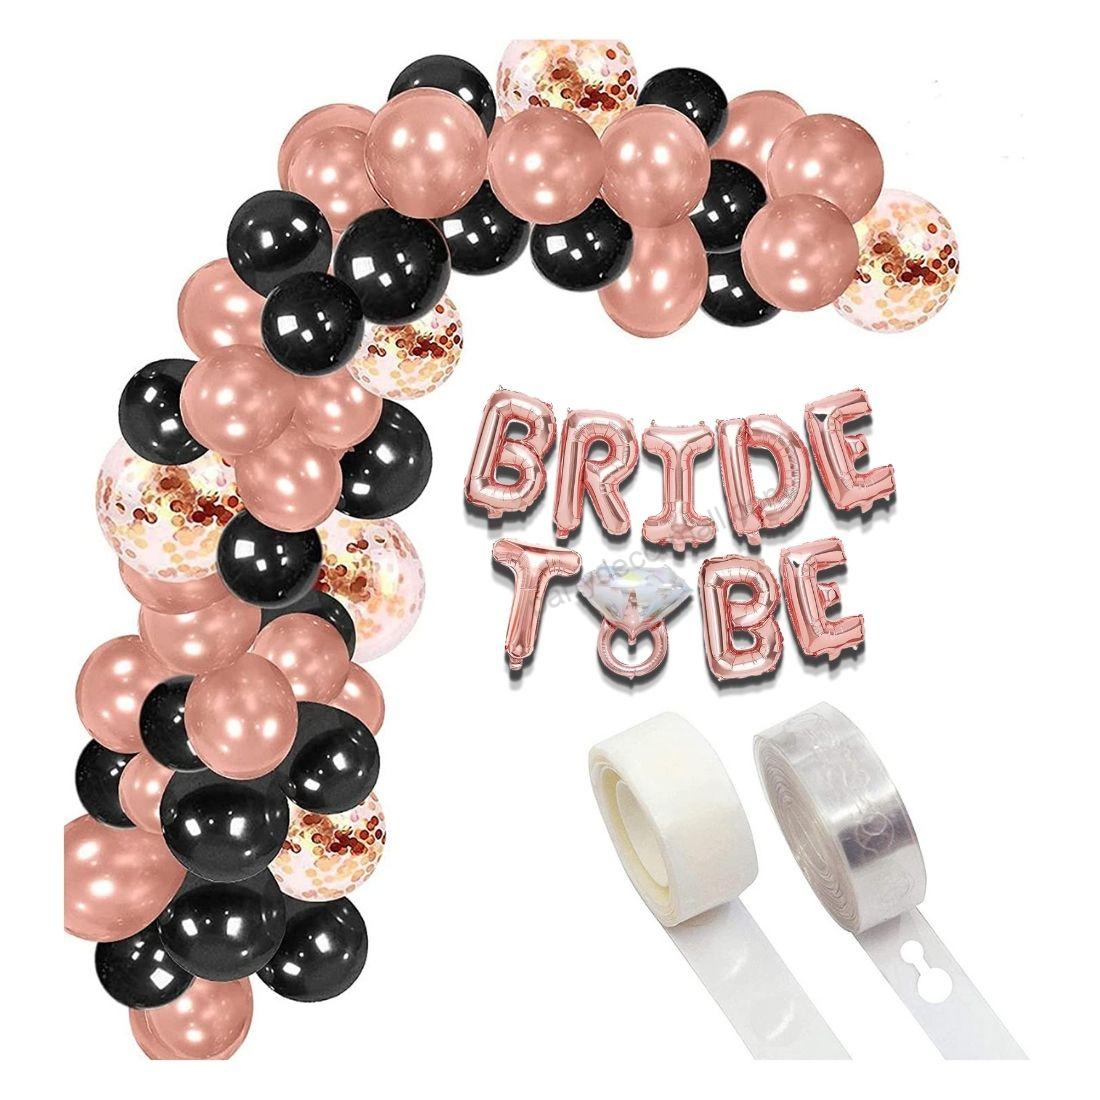 Rose Gold Bride To Be Balloons and Confetti Balloons Black, Metallic Rose Gold Balloons Set for Bridal Shower Decorations -58 Pcs